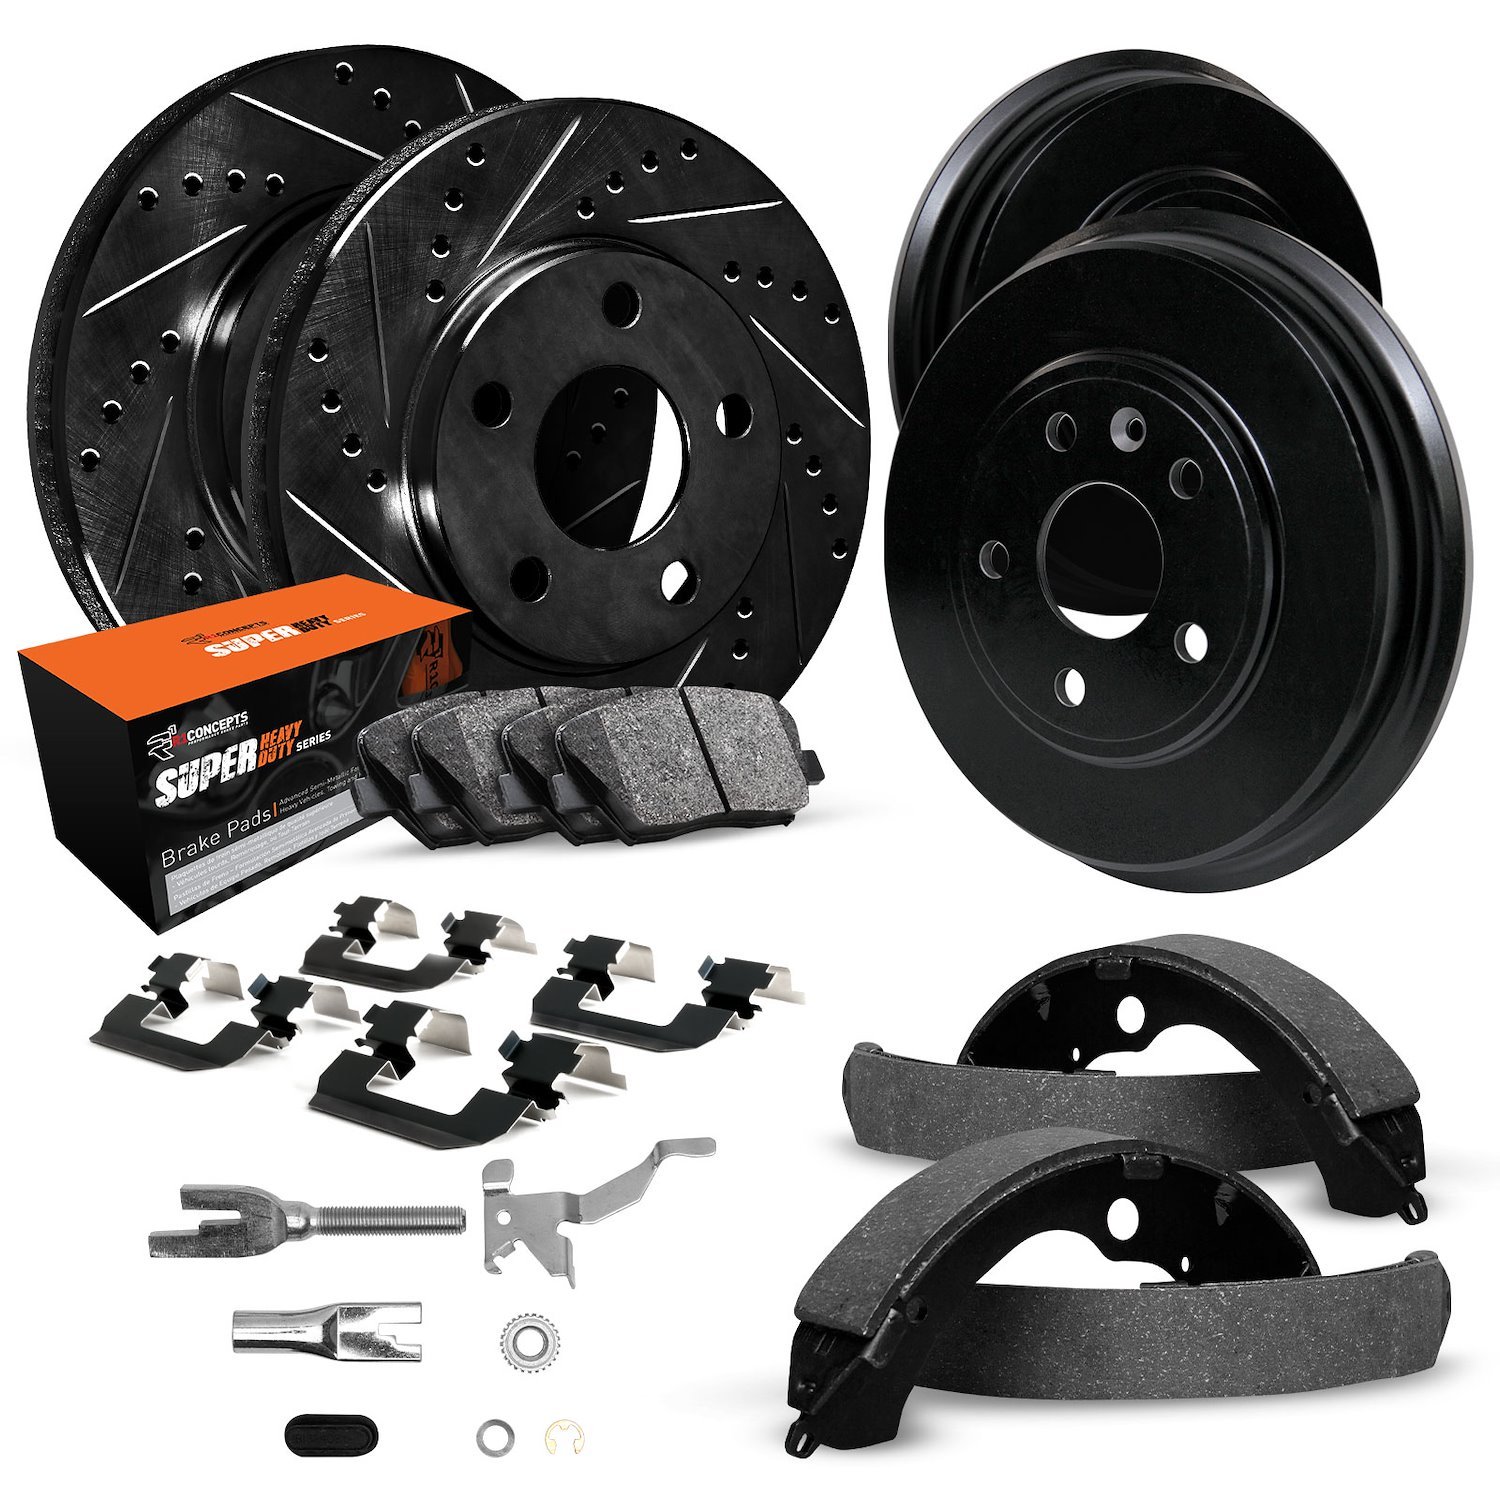 E-Line Drilled/Slotted Black Rotor & Drum Set w/Super-Duty Pads, Shoes, Hardware/Adjusters, 1990-1994 Ford/Lincoln/Mercury/Mazda